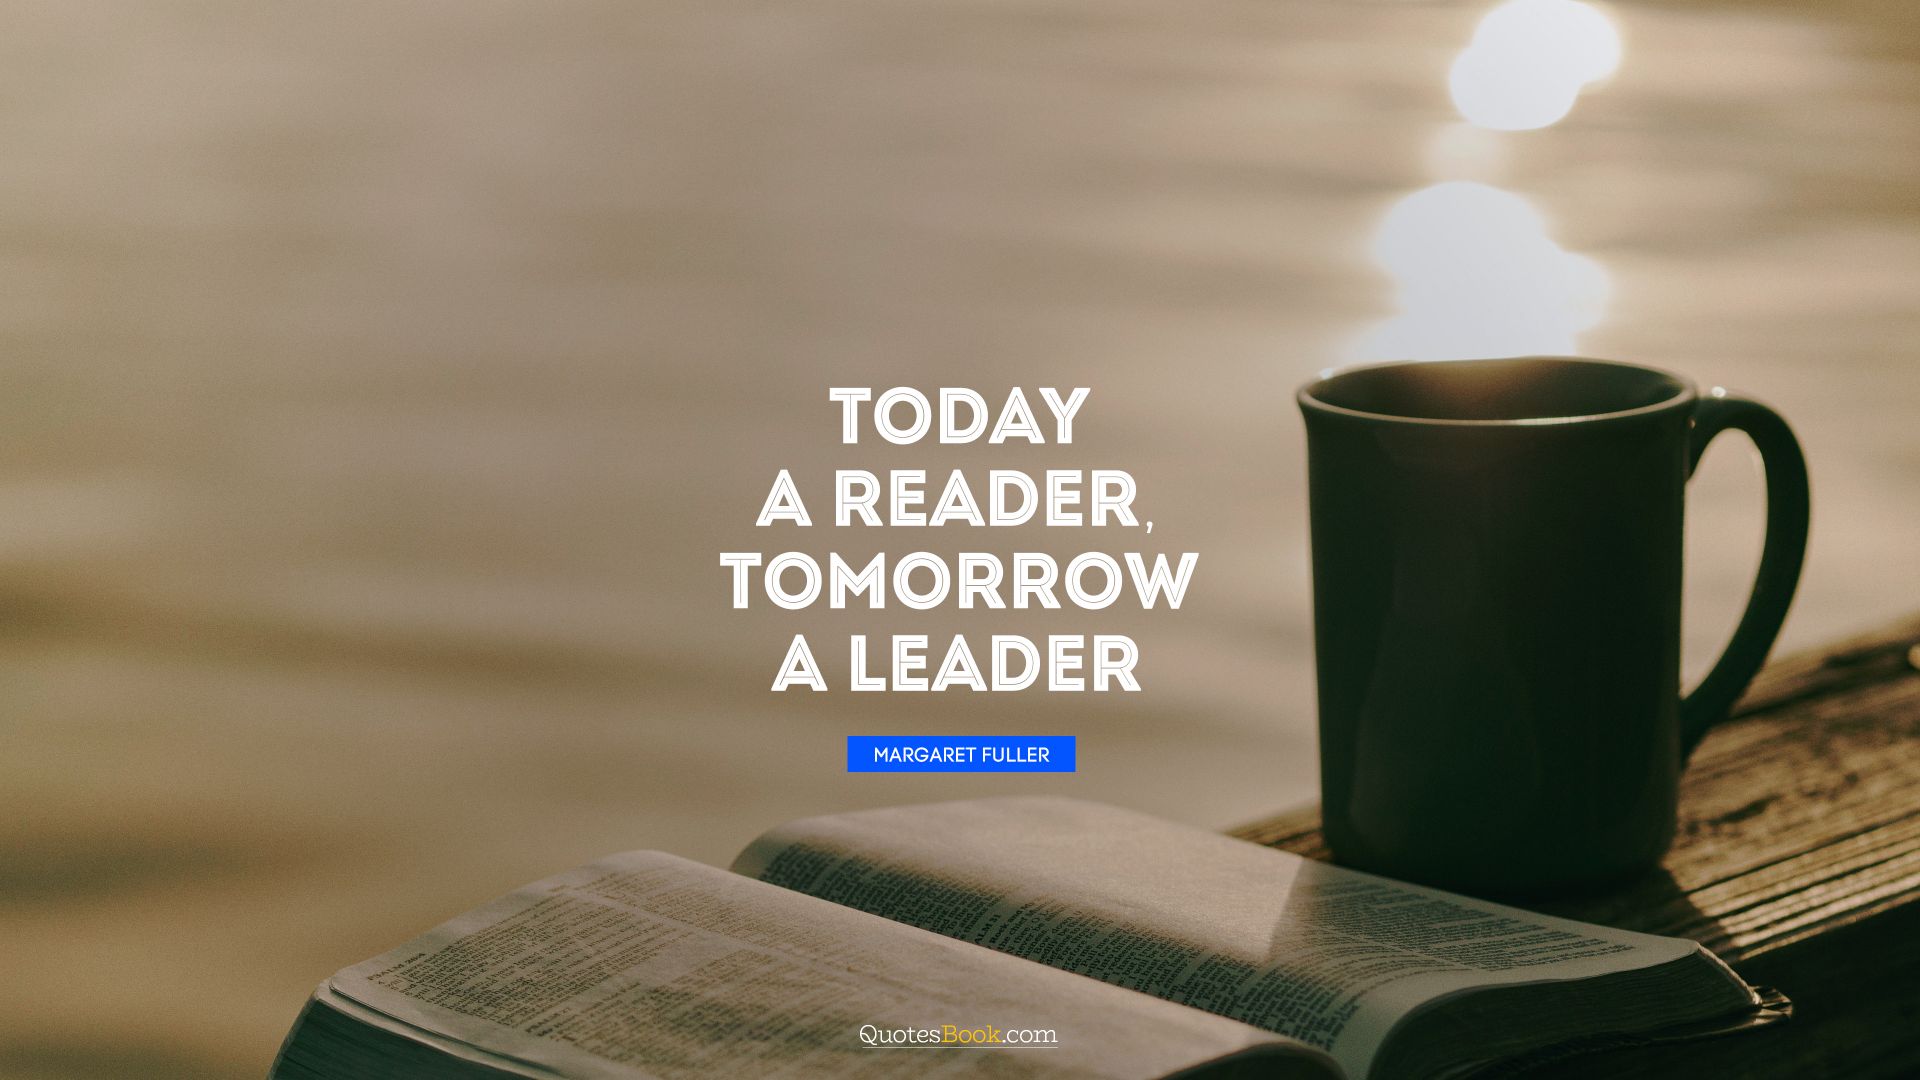 Today a reader, tomorrow a leader. - Quote by Margaret Fuller